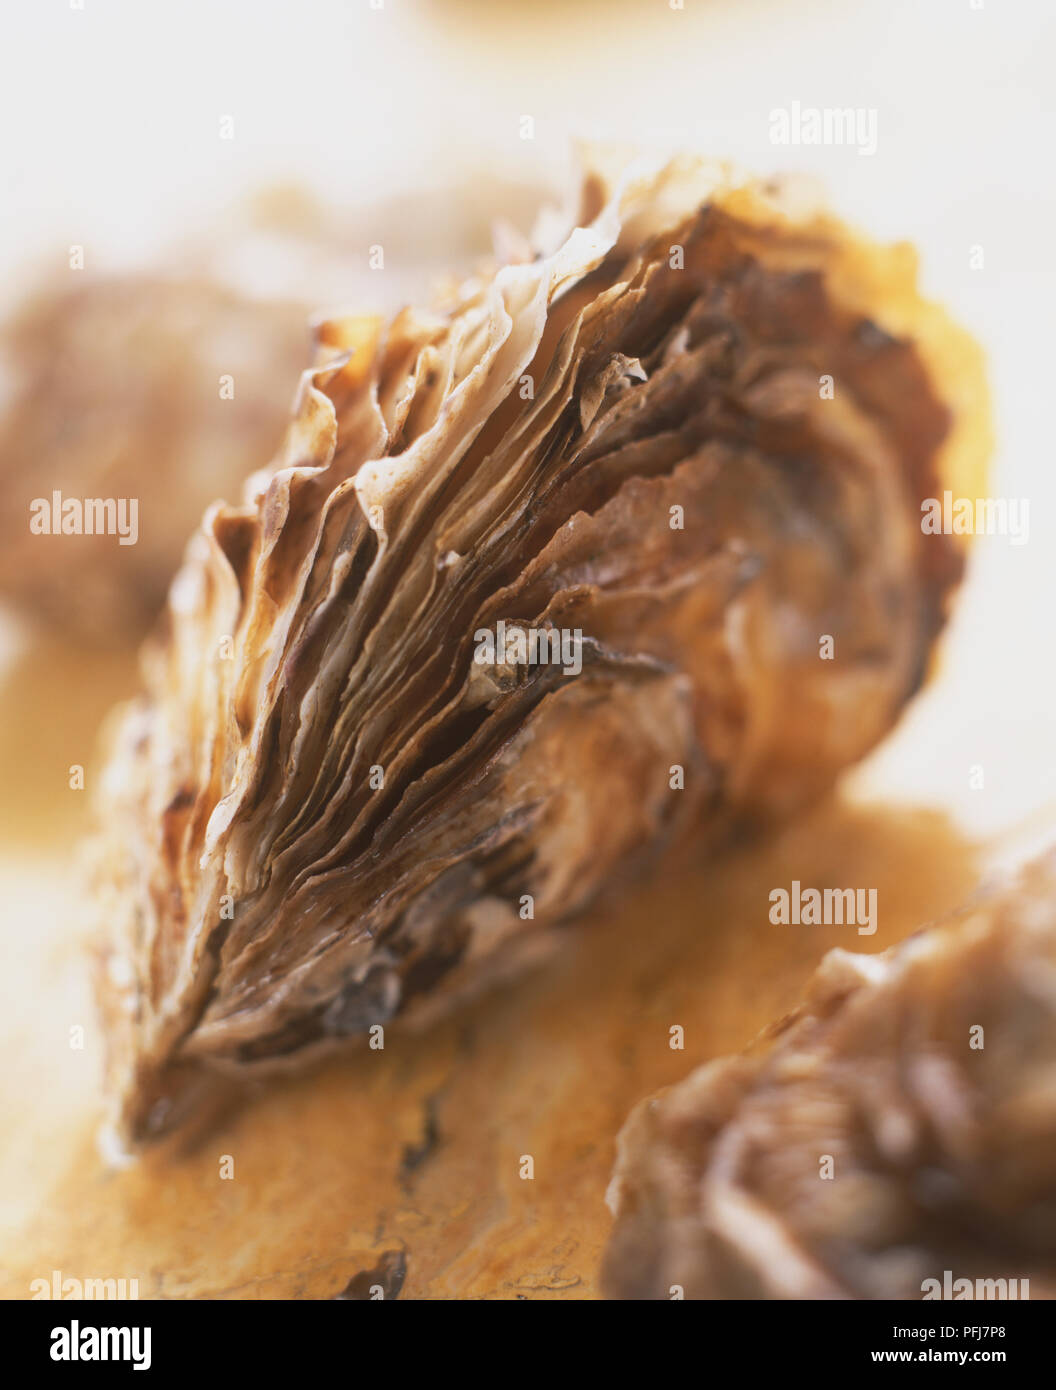 Rough irregular shell of closed oyster, close up showing layered segments and ridges, blurred background Stock Photo